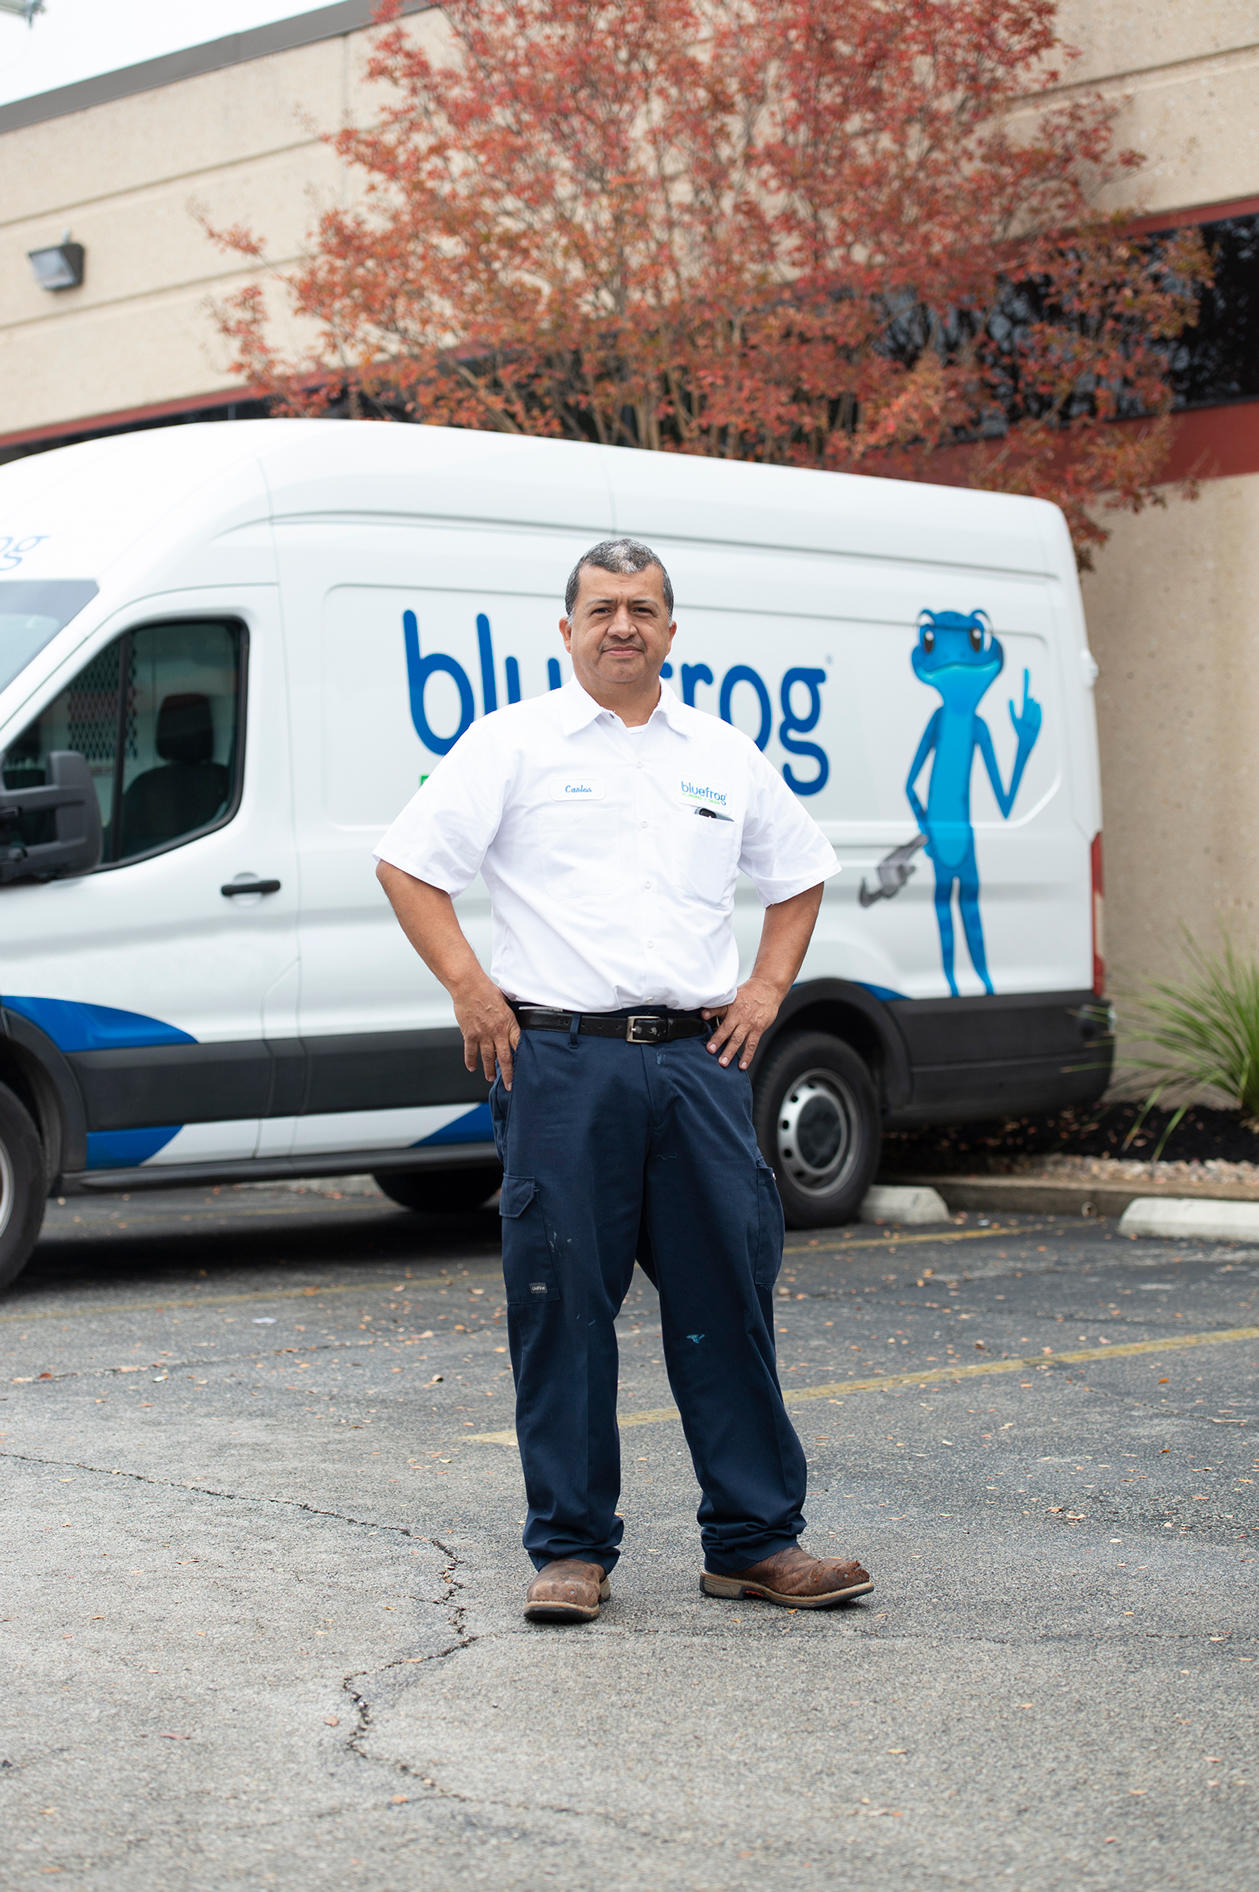 Service tech in front of a bluefrog Plumbing + Drain service van ready to install water filtration systems in New Orleans LA homes.